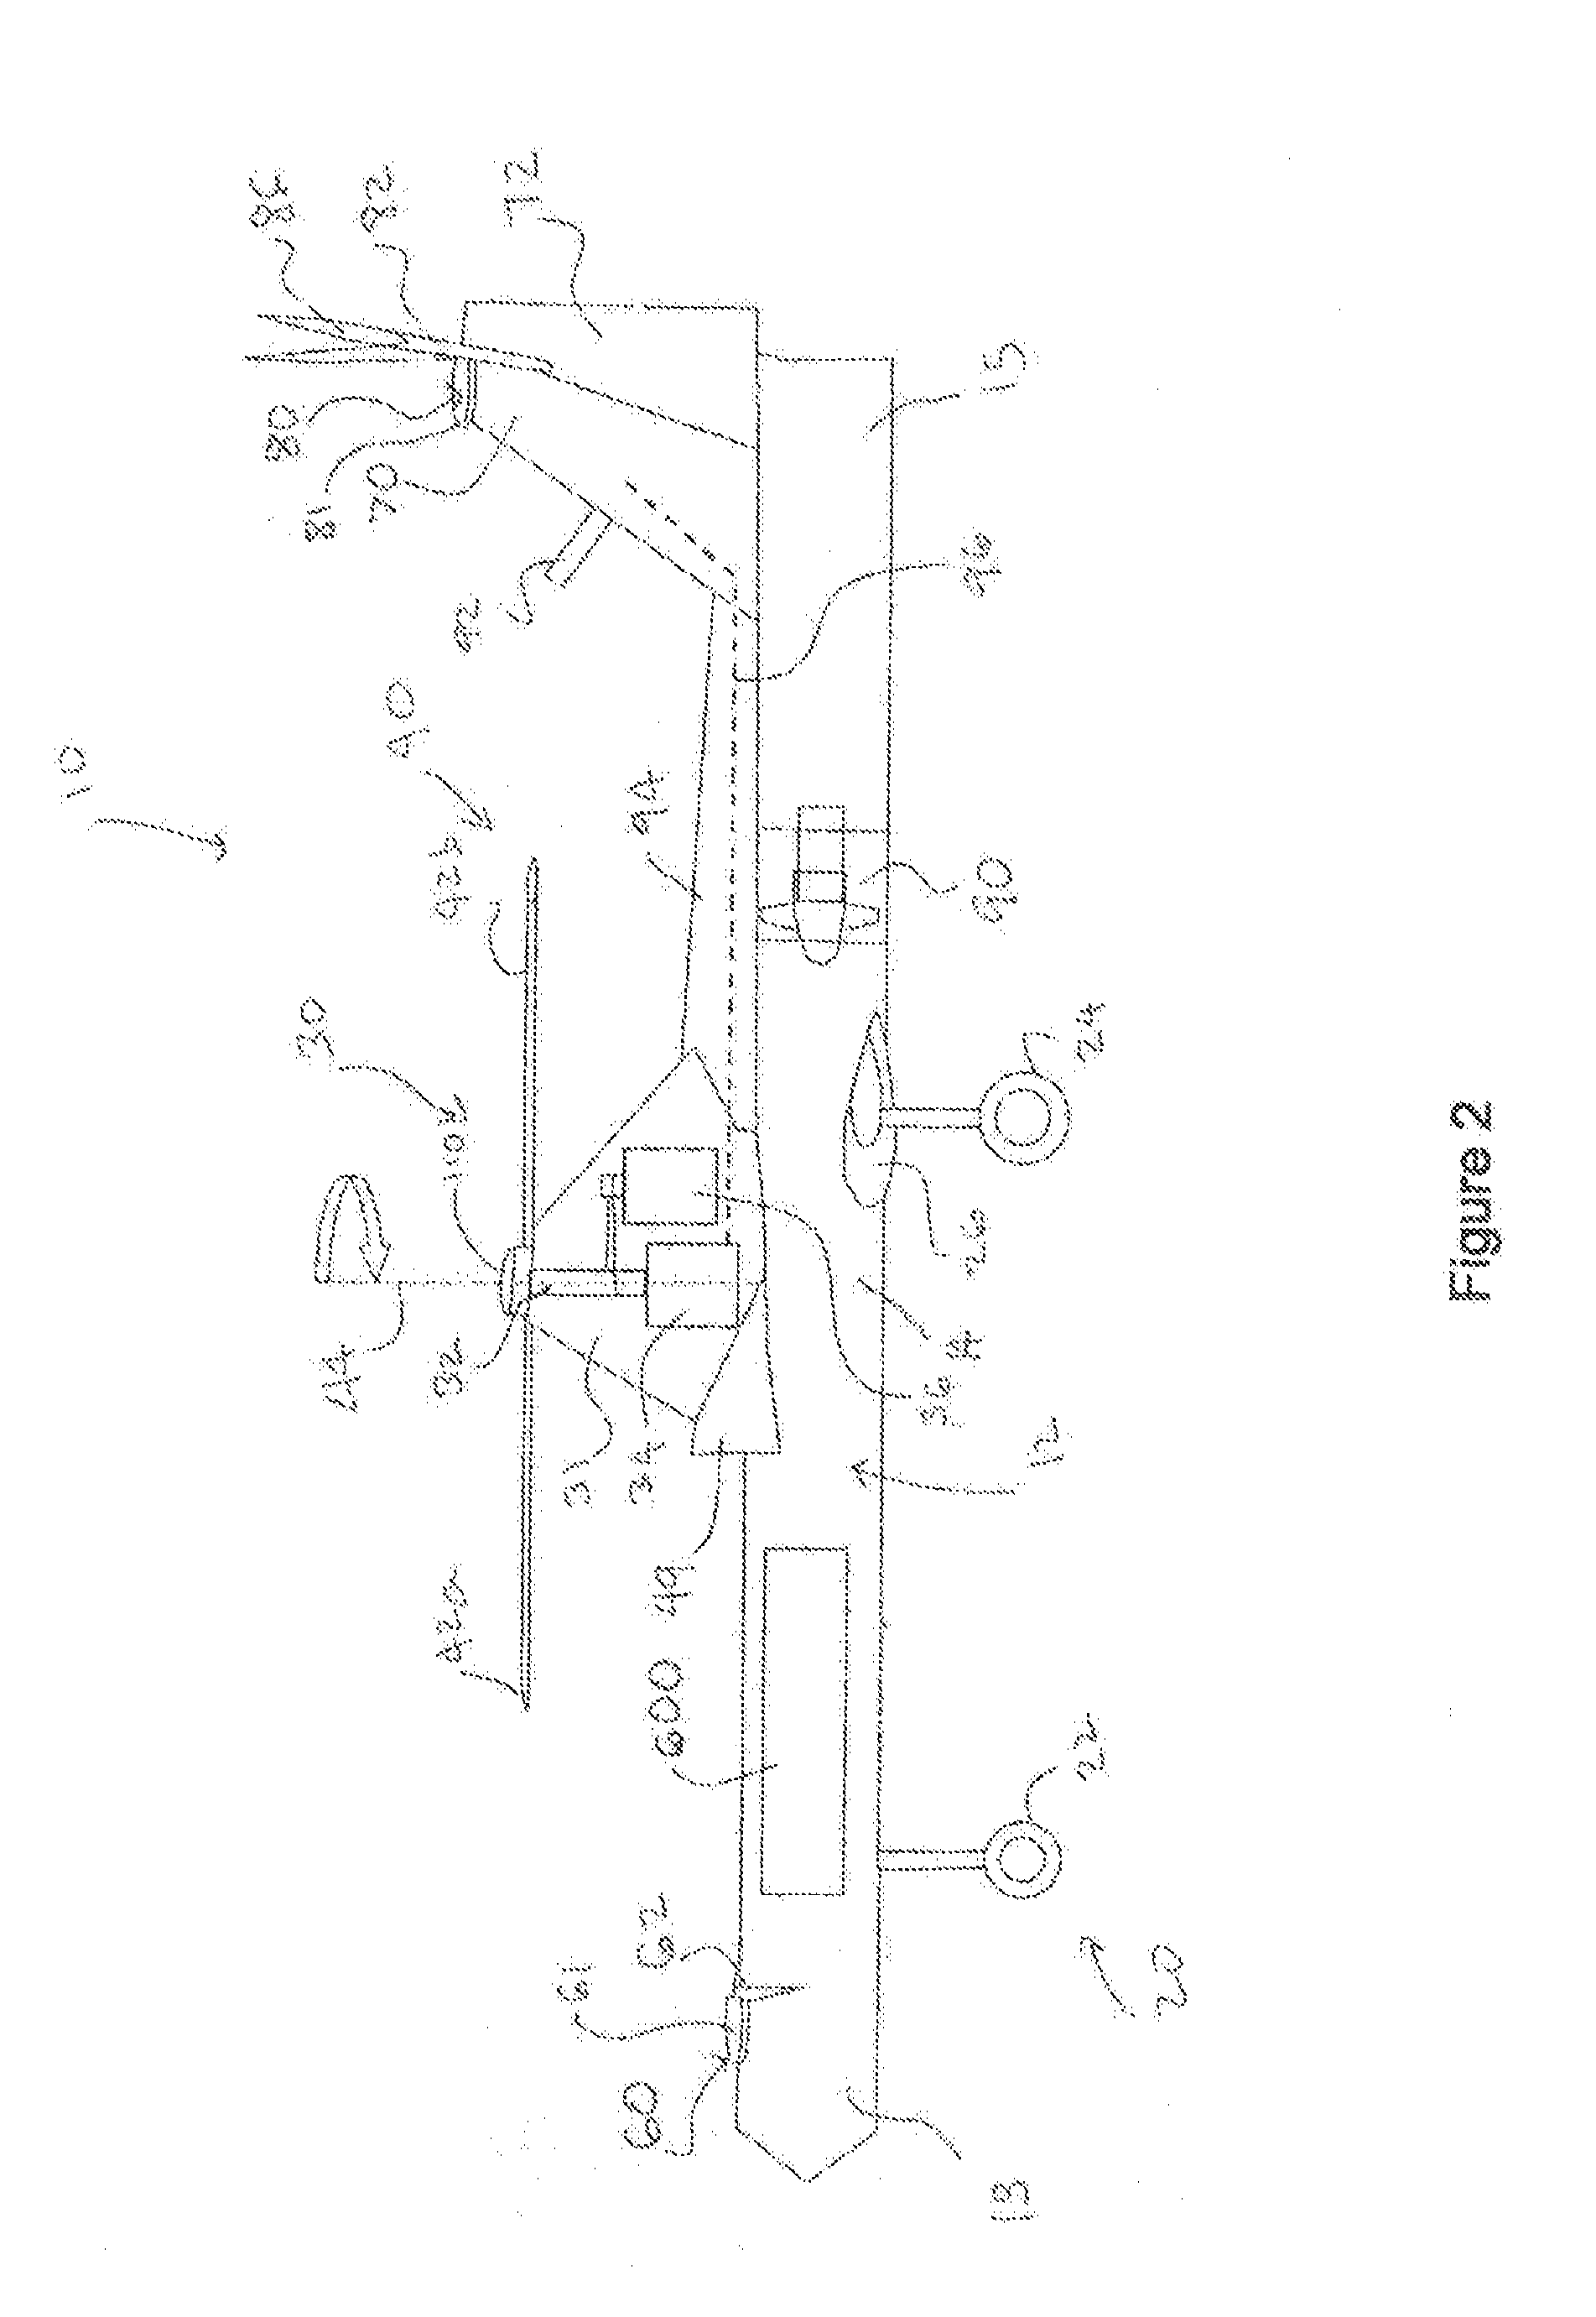 Aircraft and methods for operating an aircraft